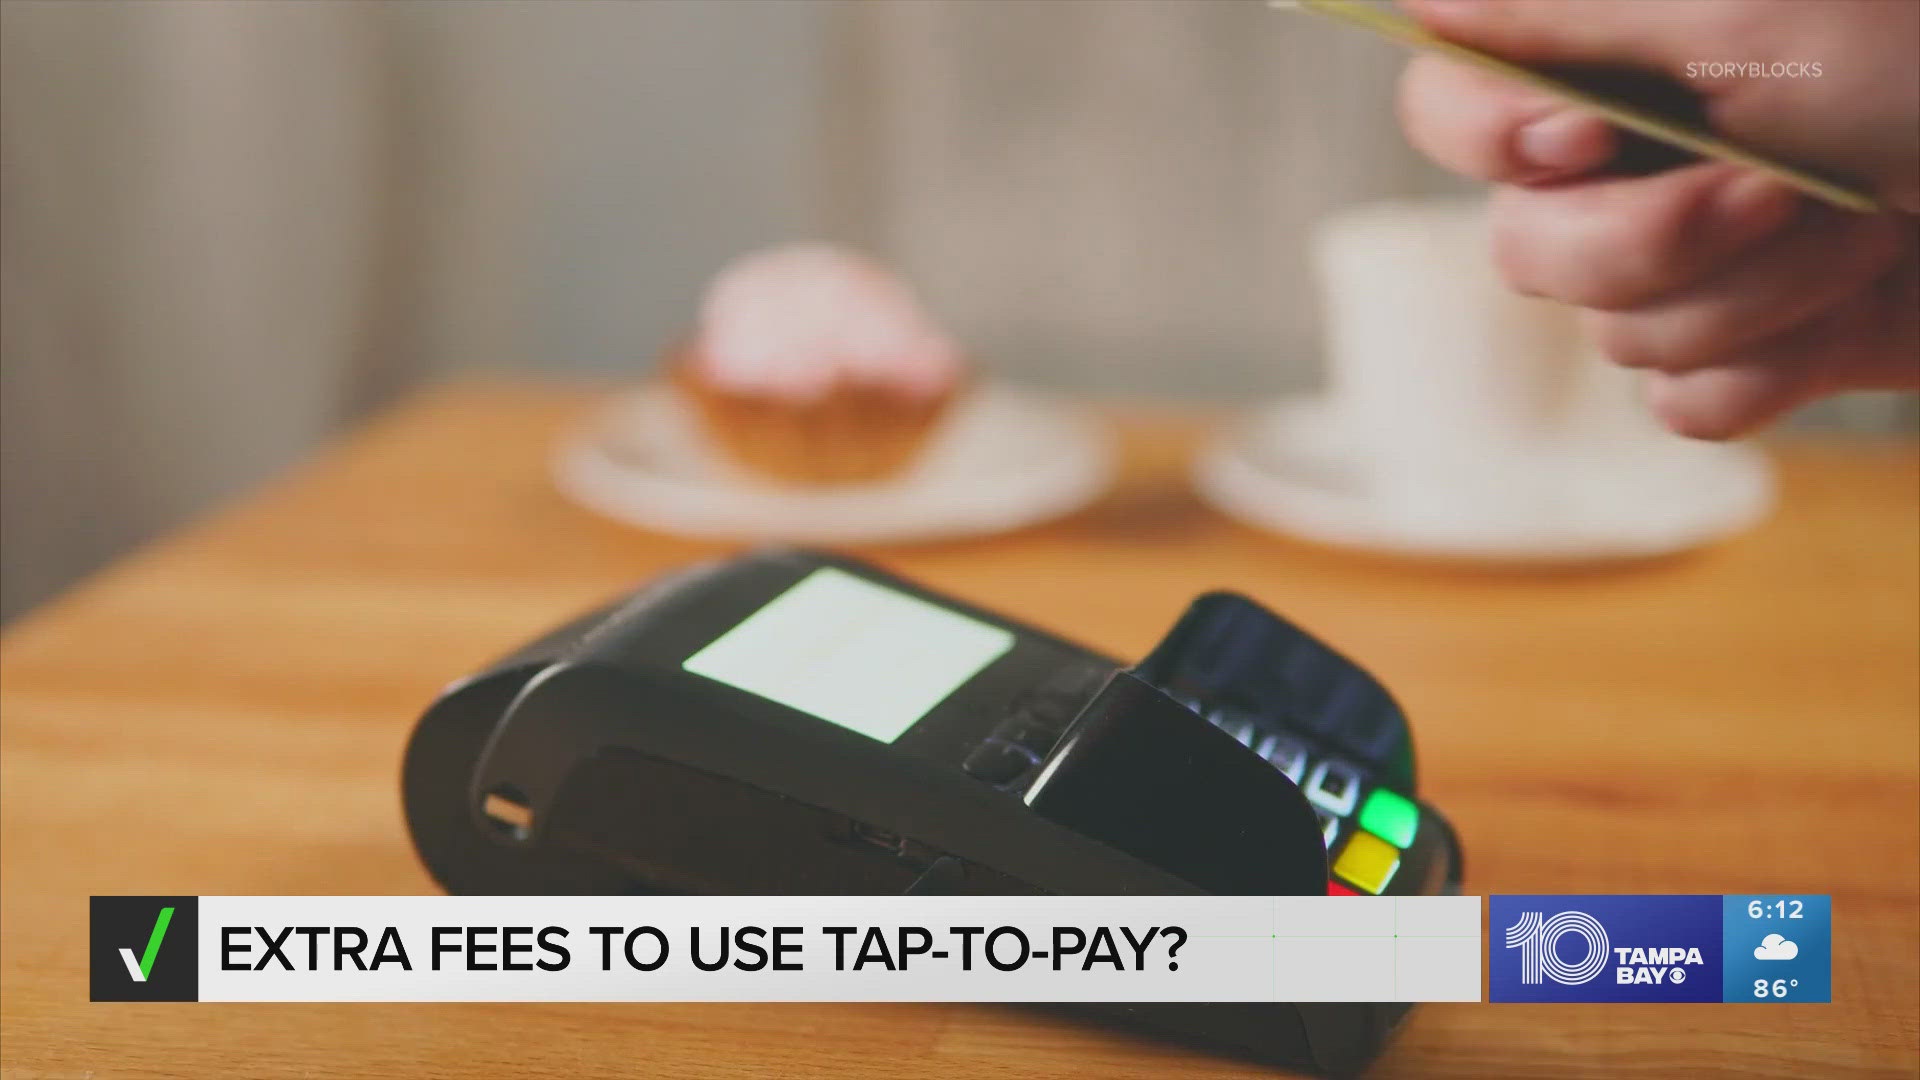 Consumers aren’t charged additional fees for using tap-to-pay methods instead of swiping or inserting their credit or debit cards.